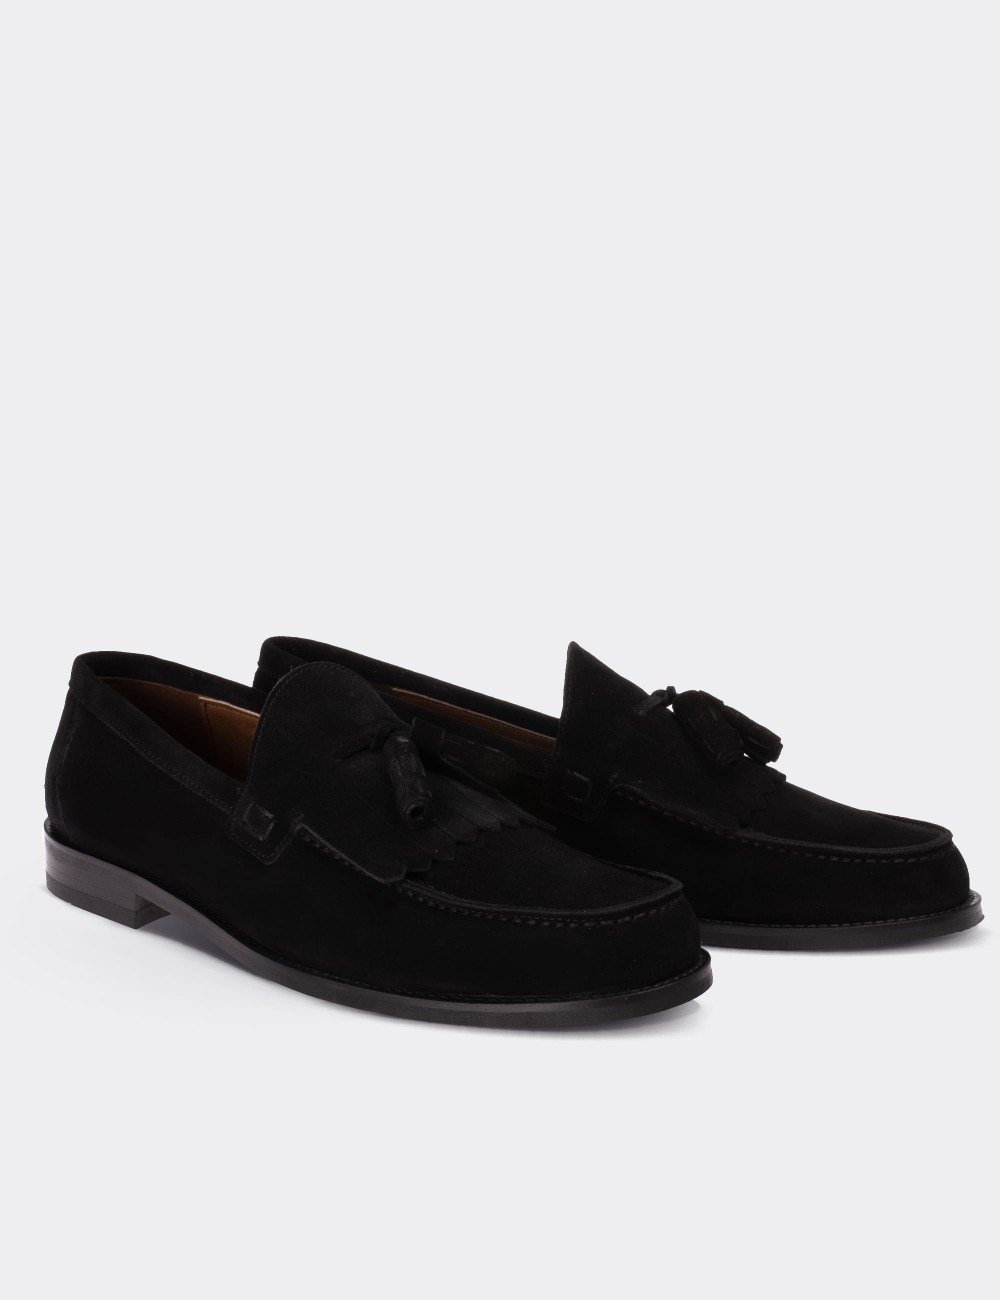 Black Suede Leather Loafers - 01735MSYHM02